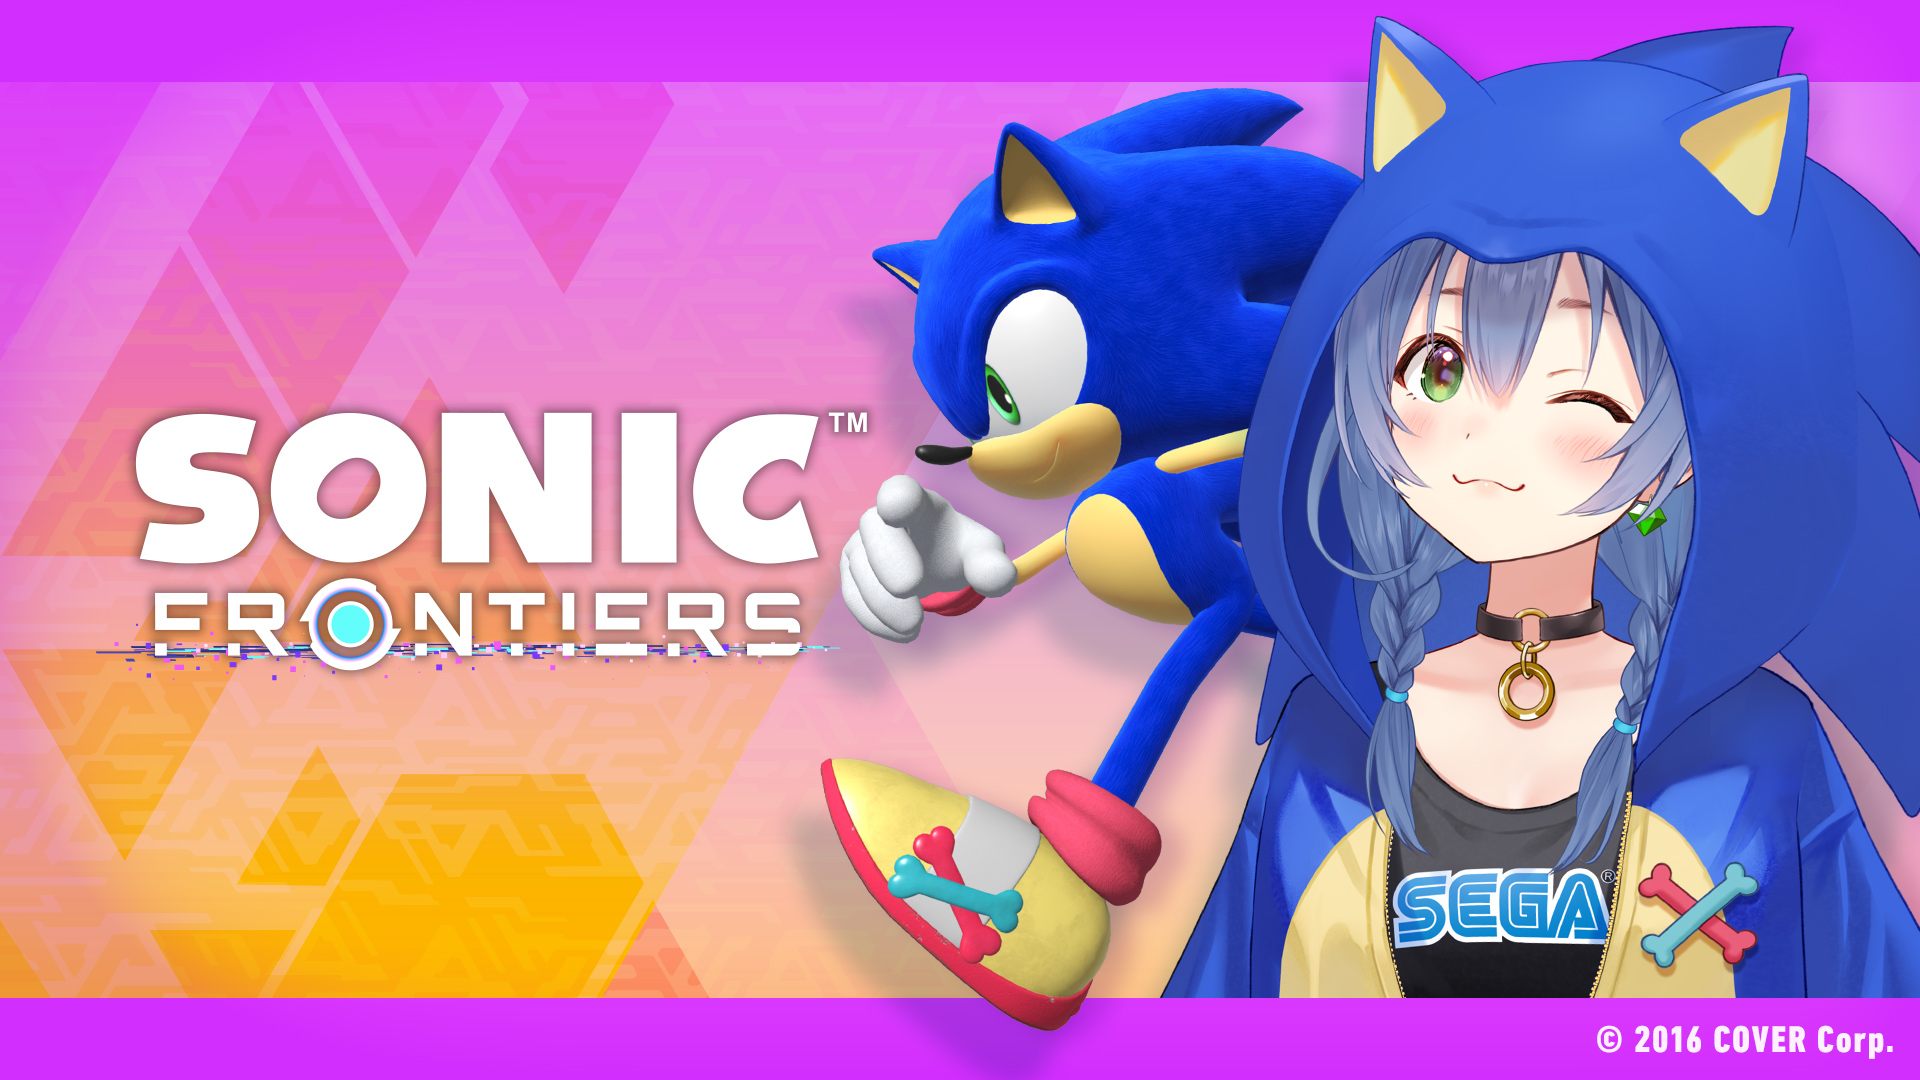 All DLC for Sonic Frontiers so far 